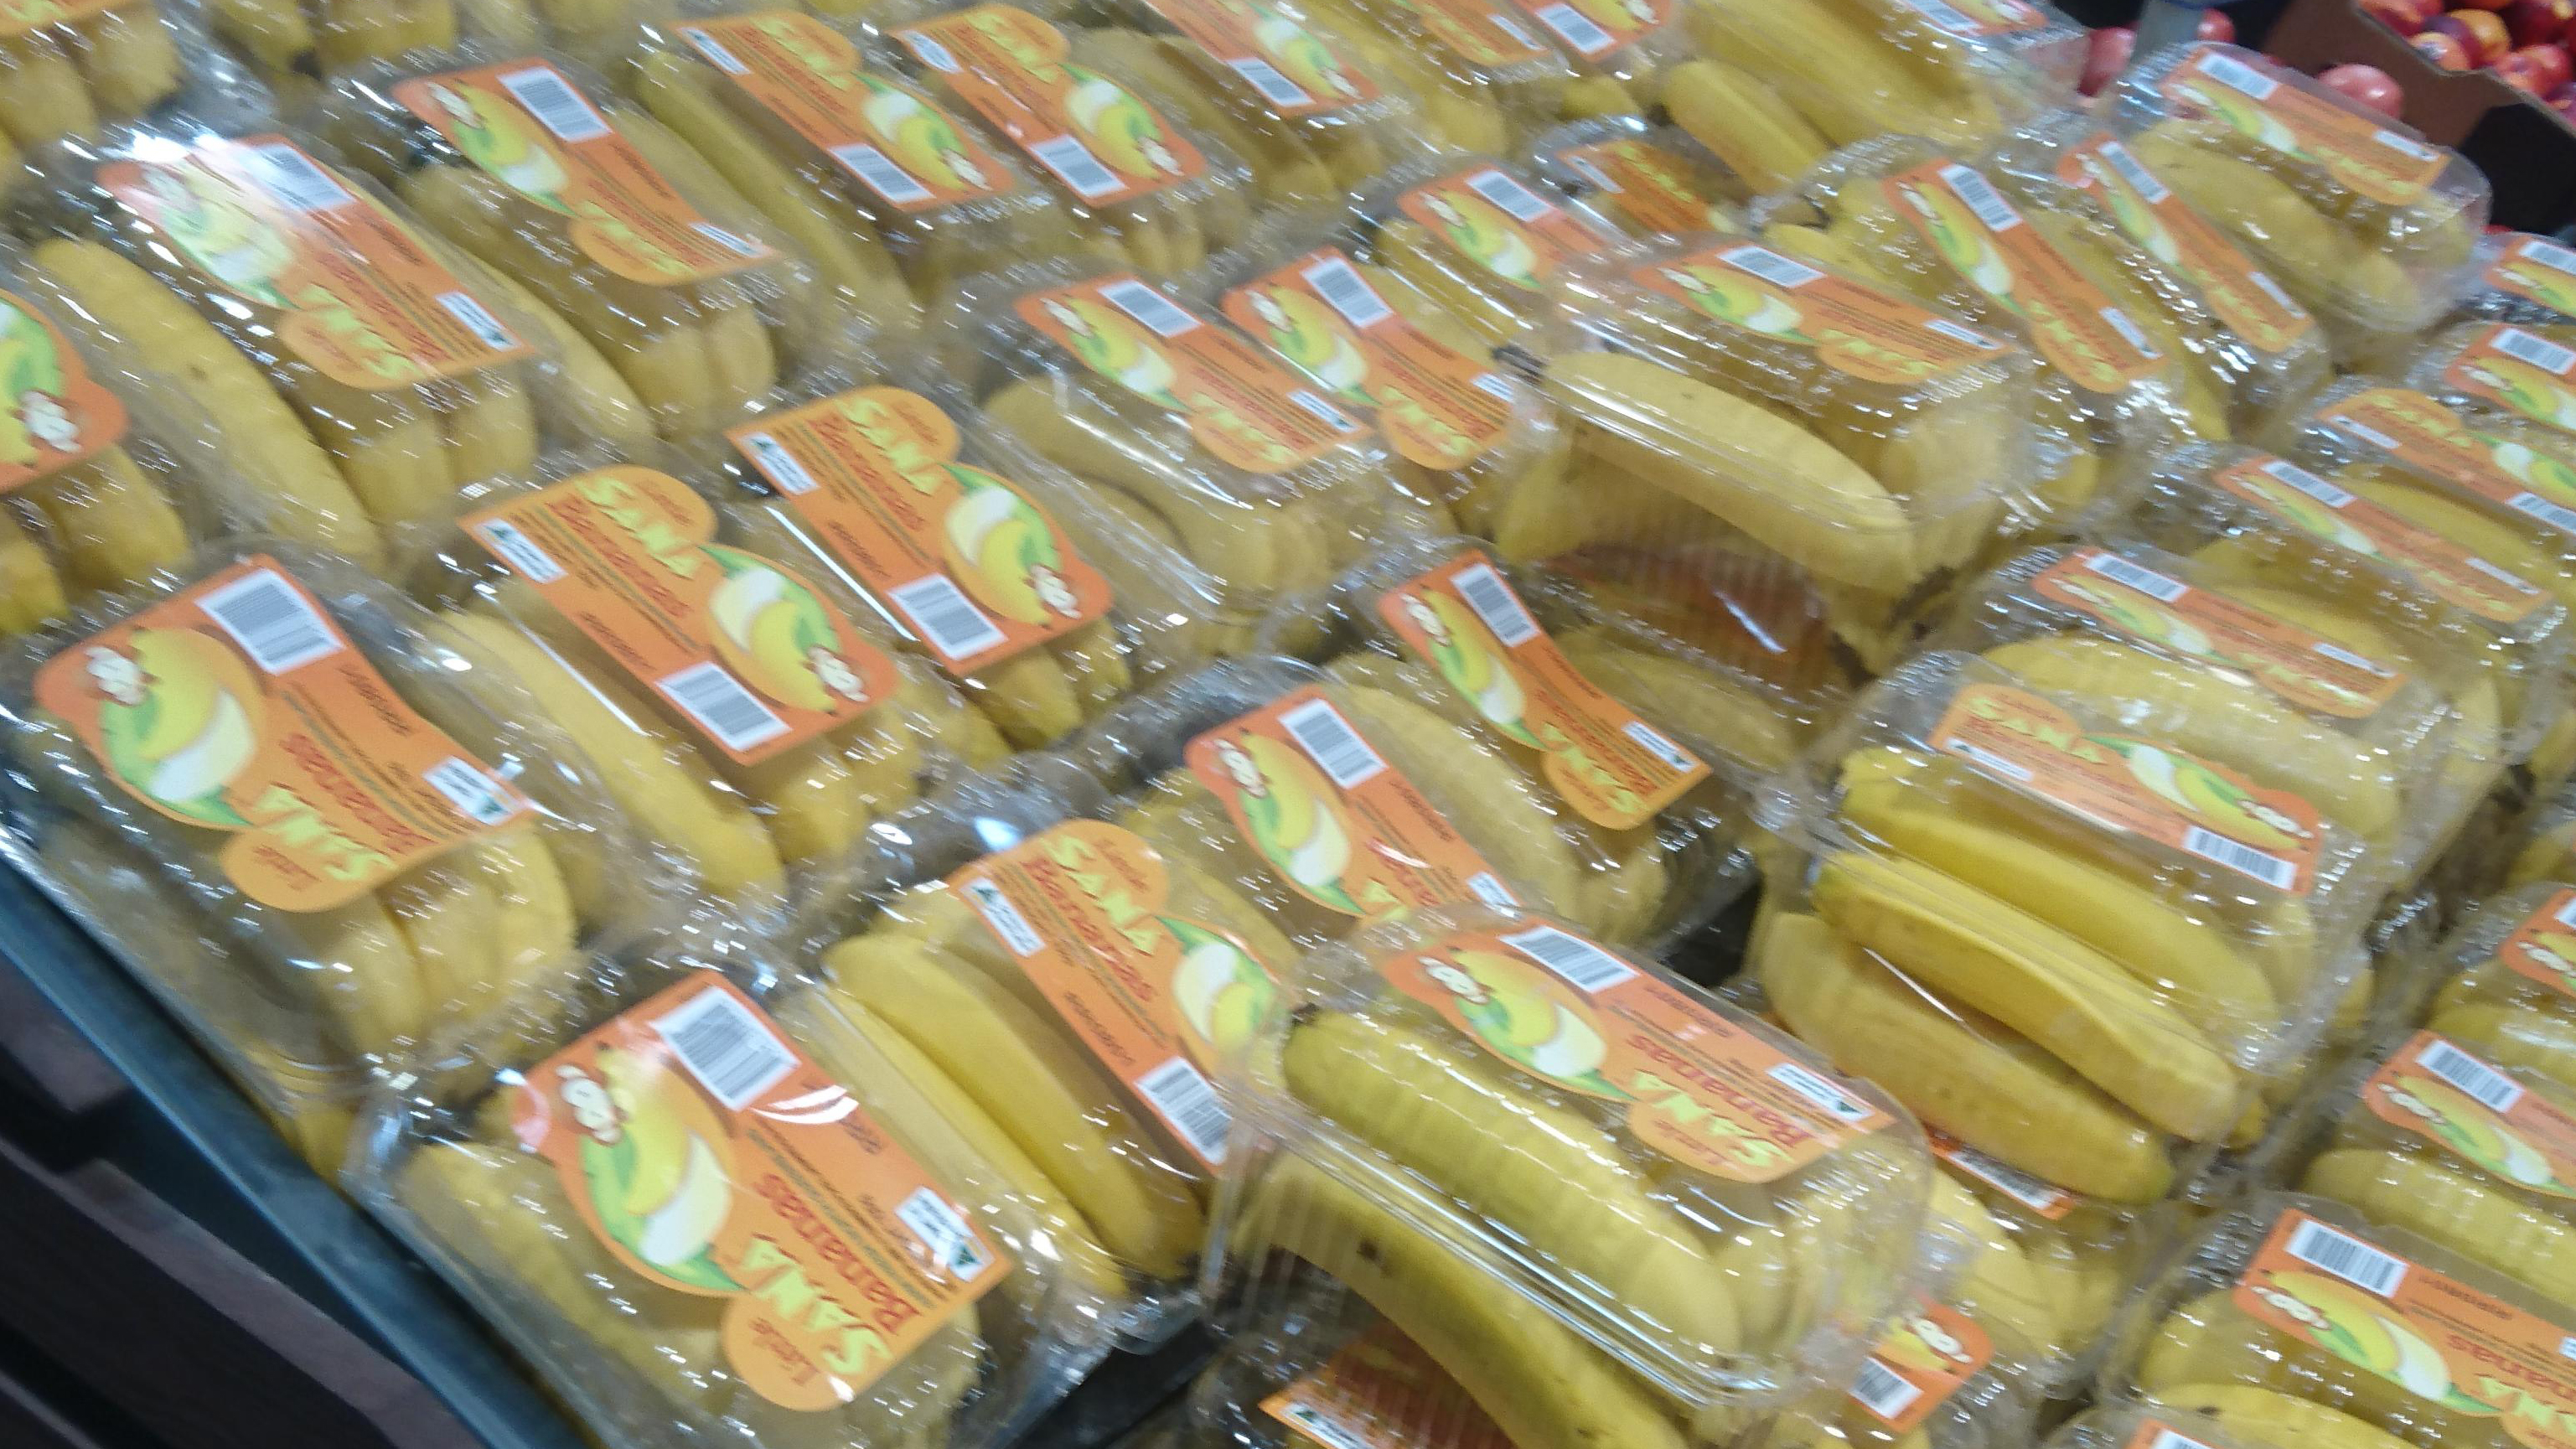 Woolworths plastic packaging: Photo of packed bananas sparks outrage